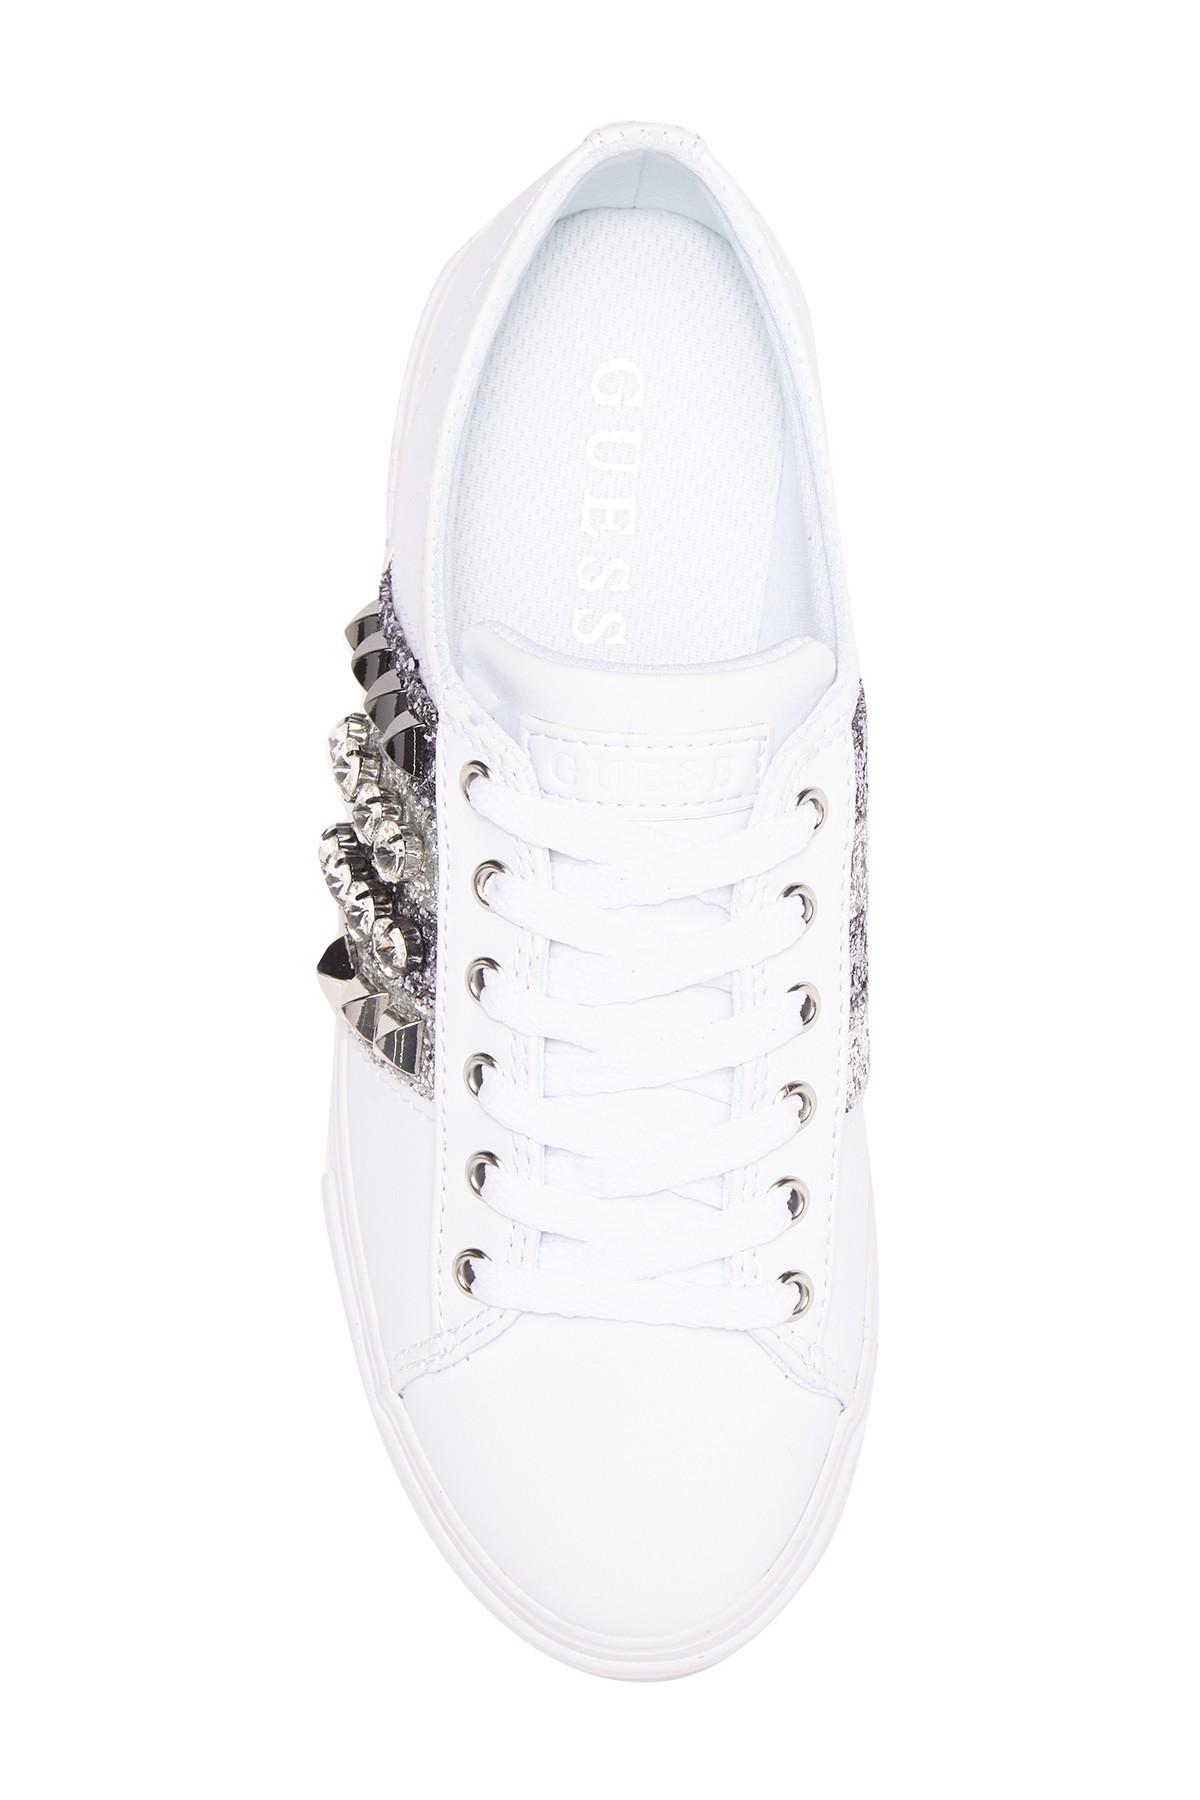 guess gally sneaker